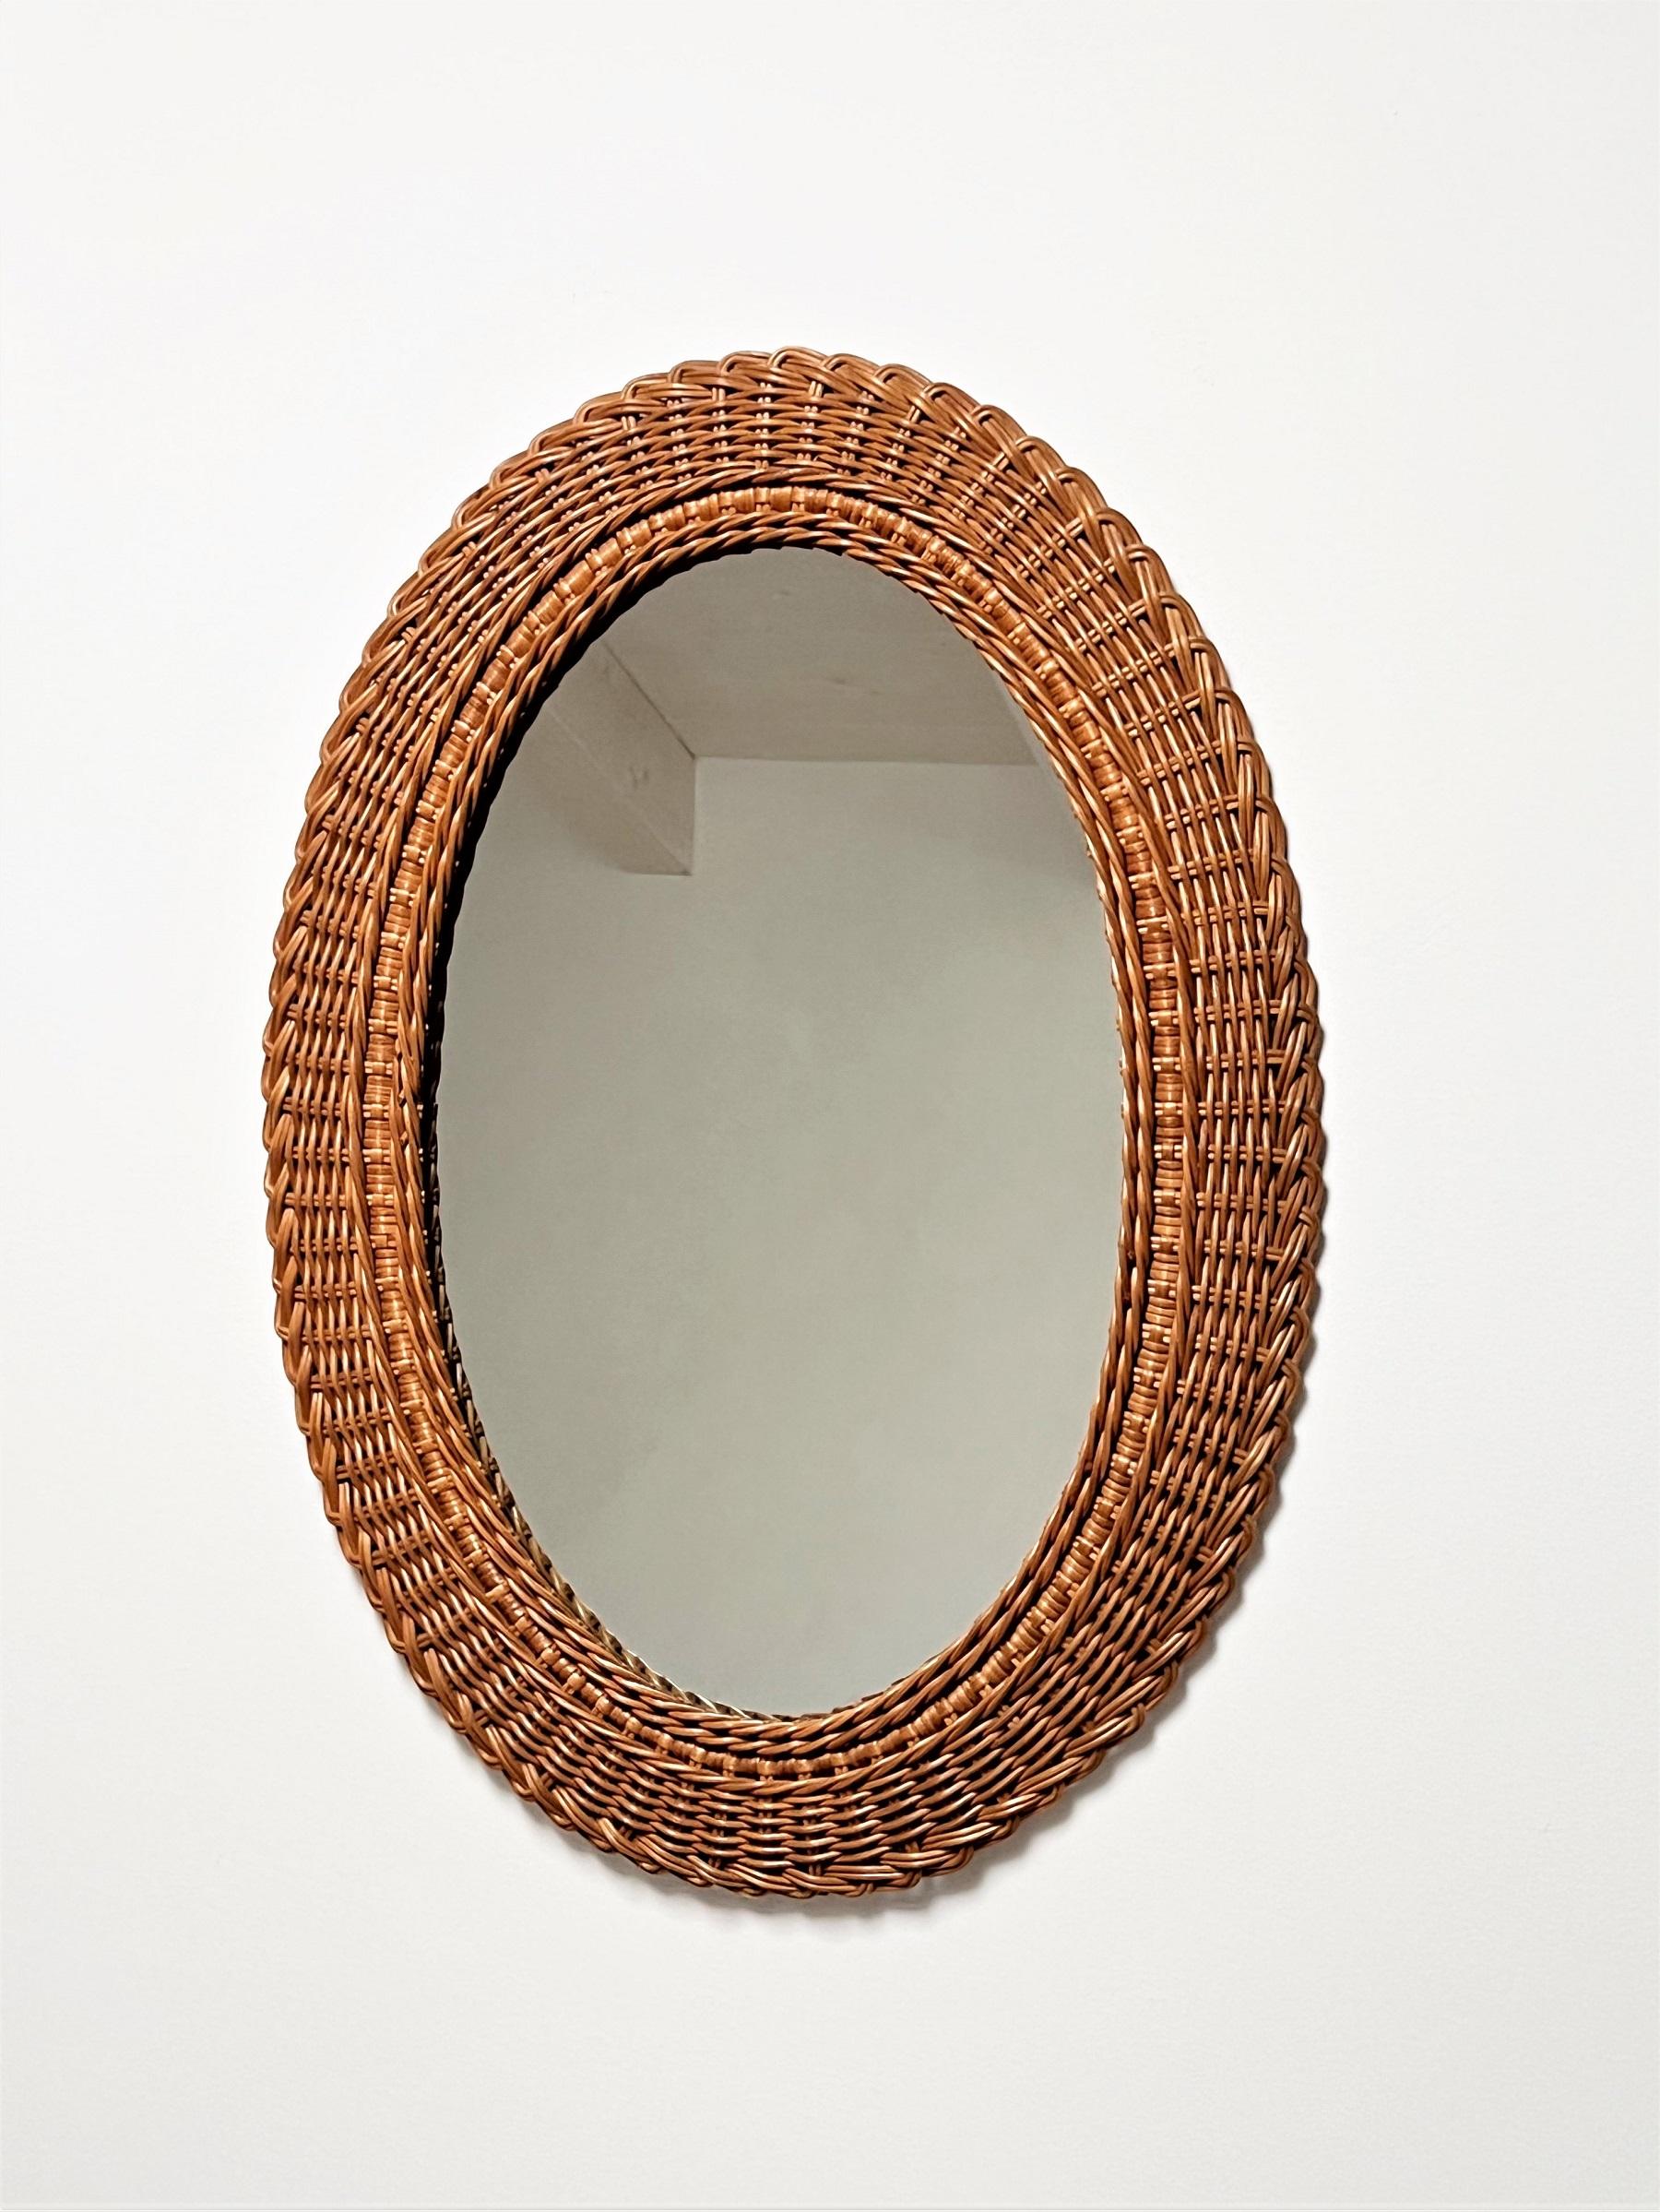 Beautiful wall mirror made in Italy during the 1970s.
The 9 cm (3,5inch) large mirror frame is made interely of hand-crafted woven wicker.
The mirror glass and the frame are in very good condition.
At the backside is a hook for wall hanging.

